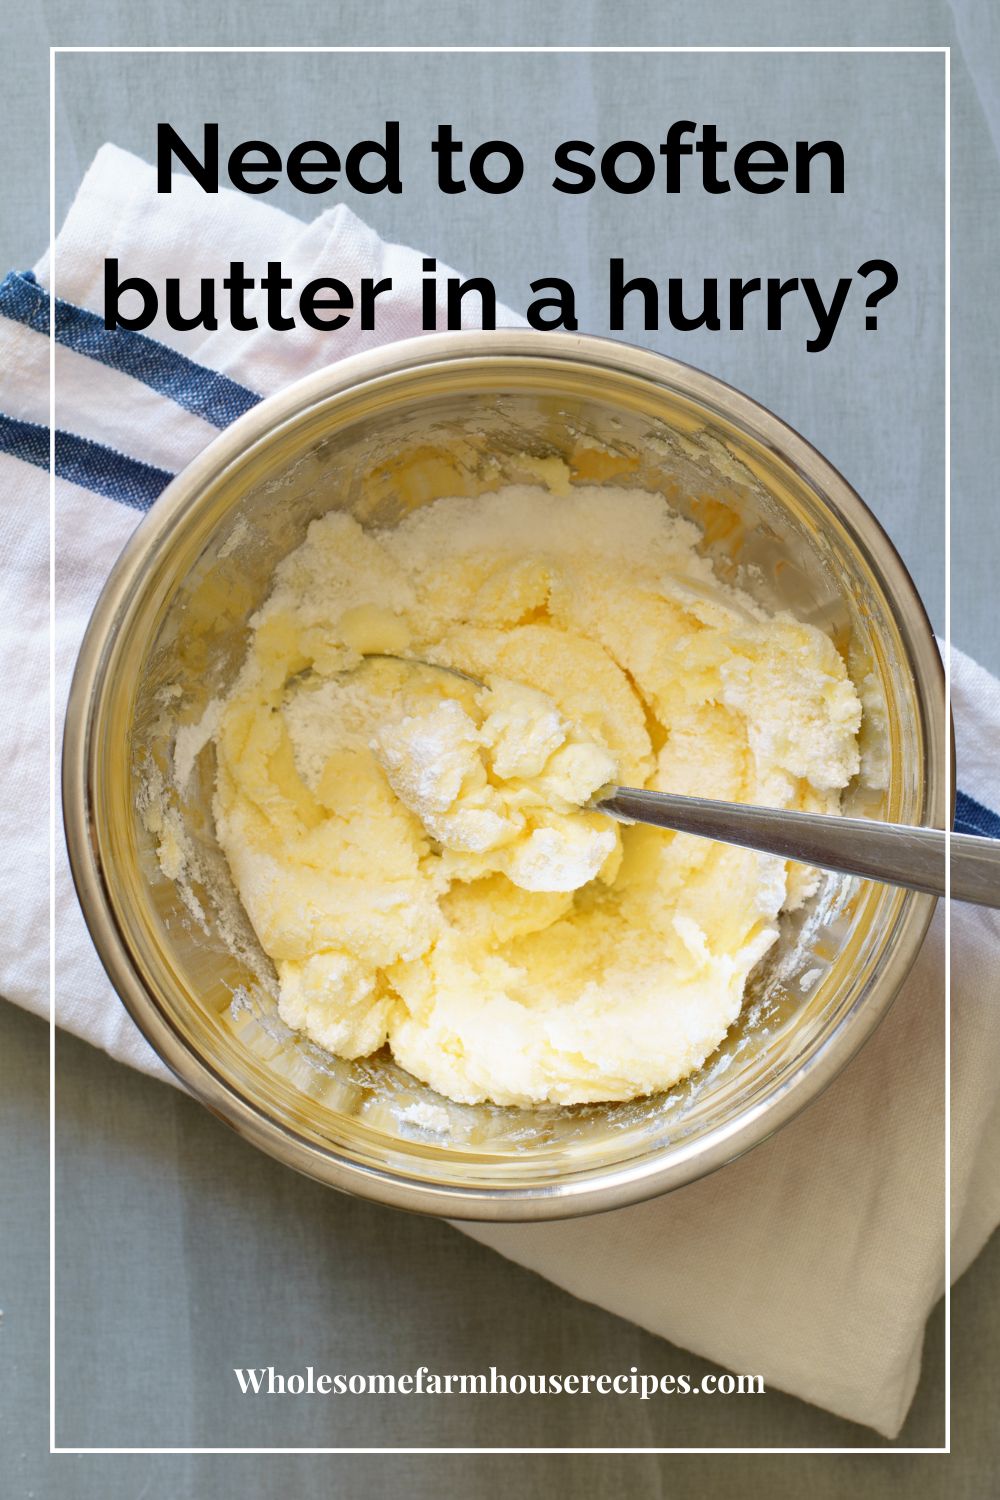 Need to soften butter in a hurry